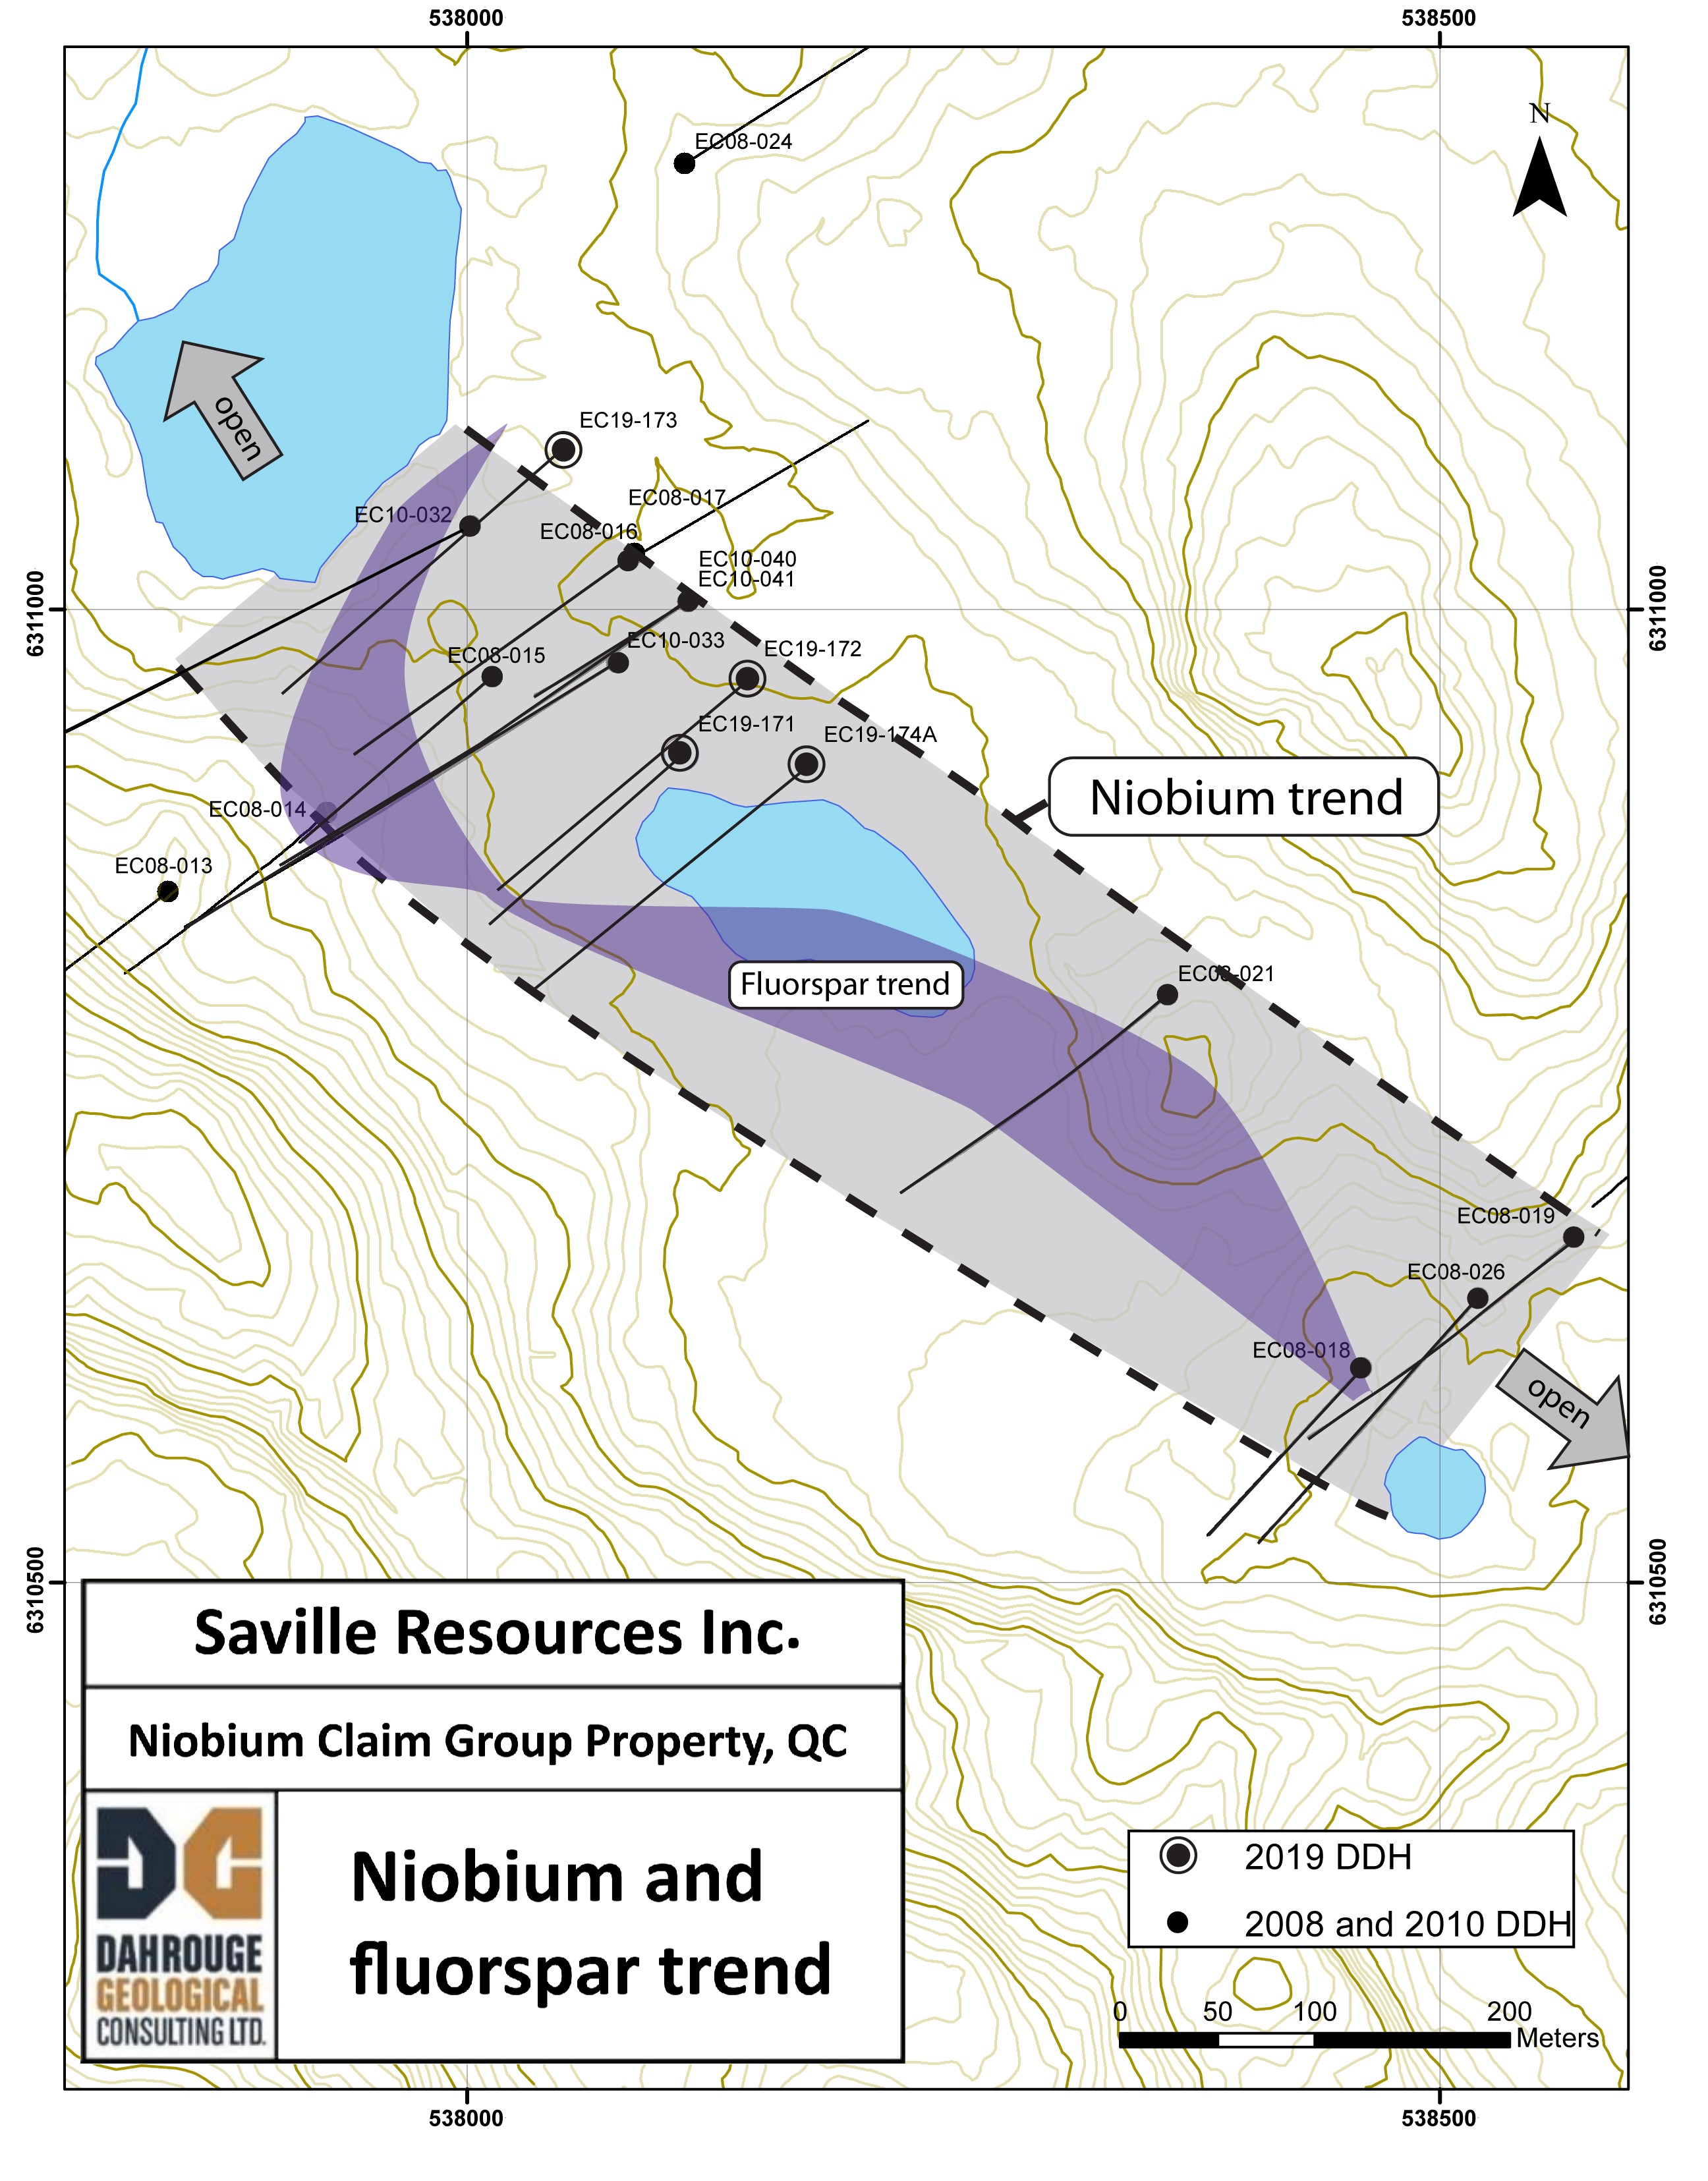 Saville Resources Inc., Thursday, July 23, 2020, Press release picture